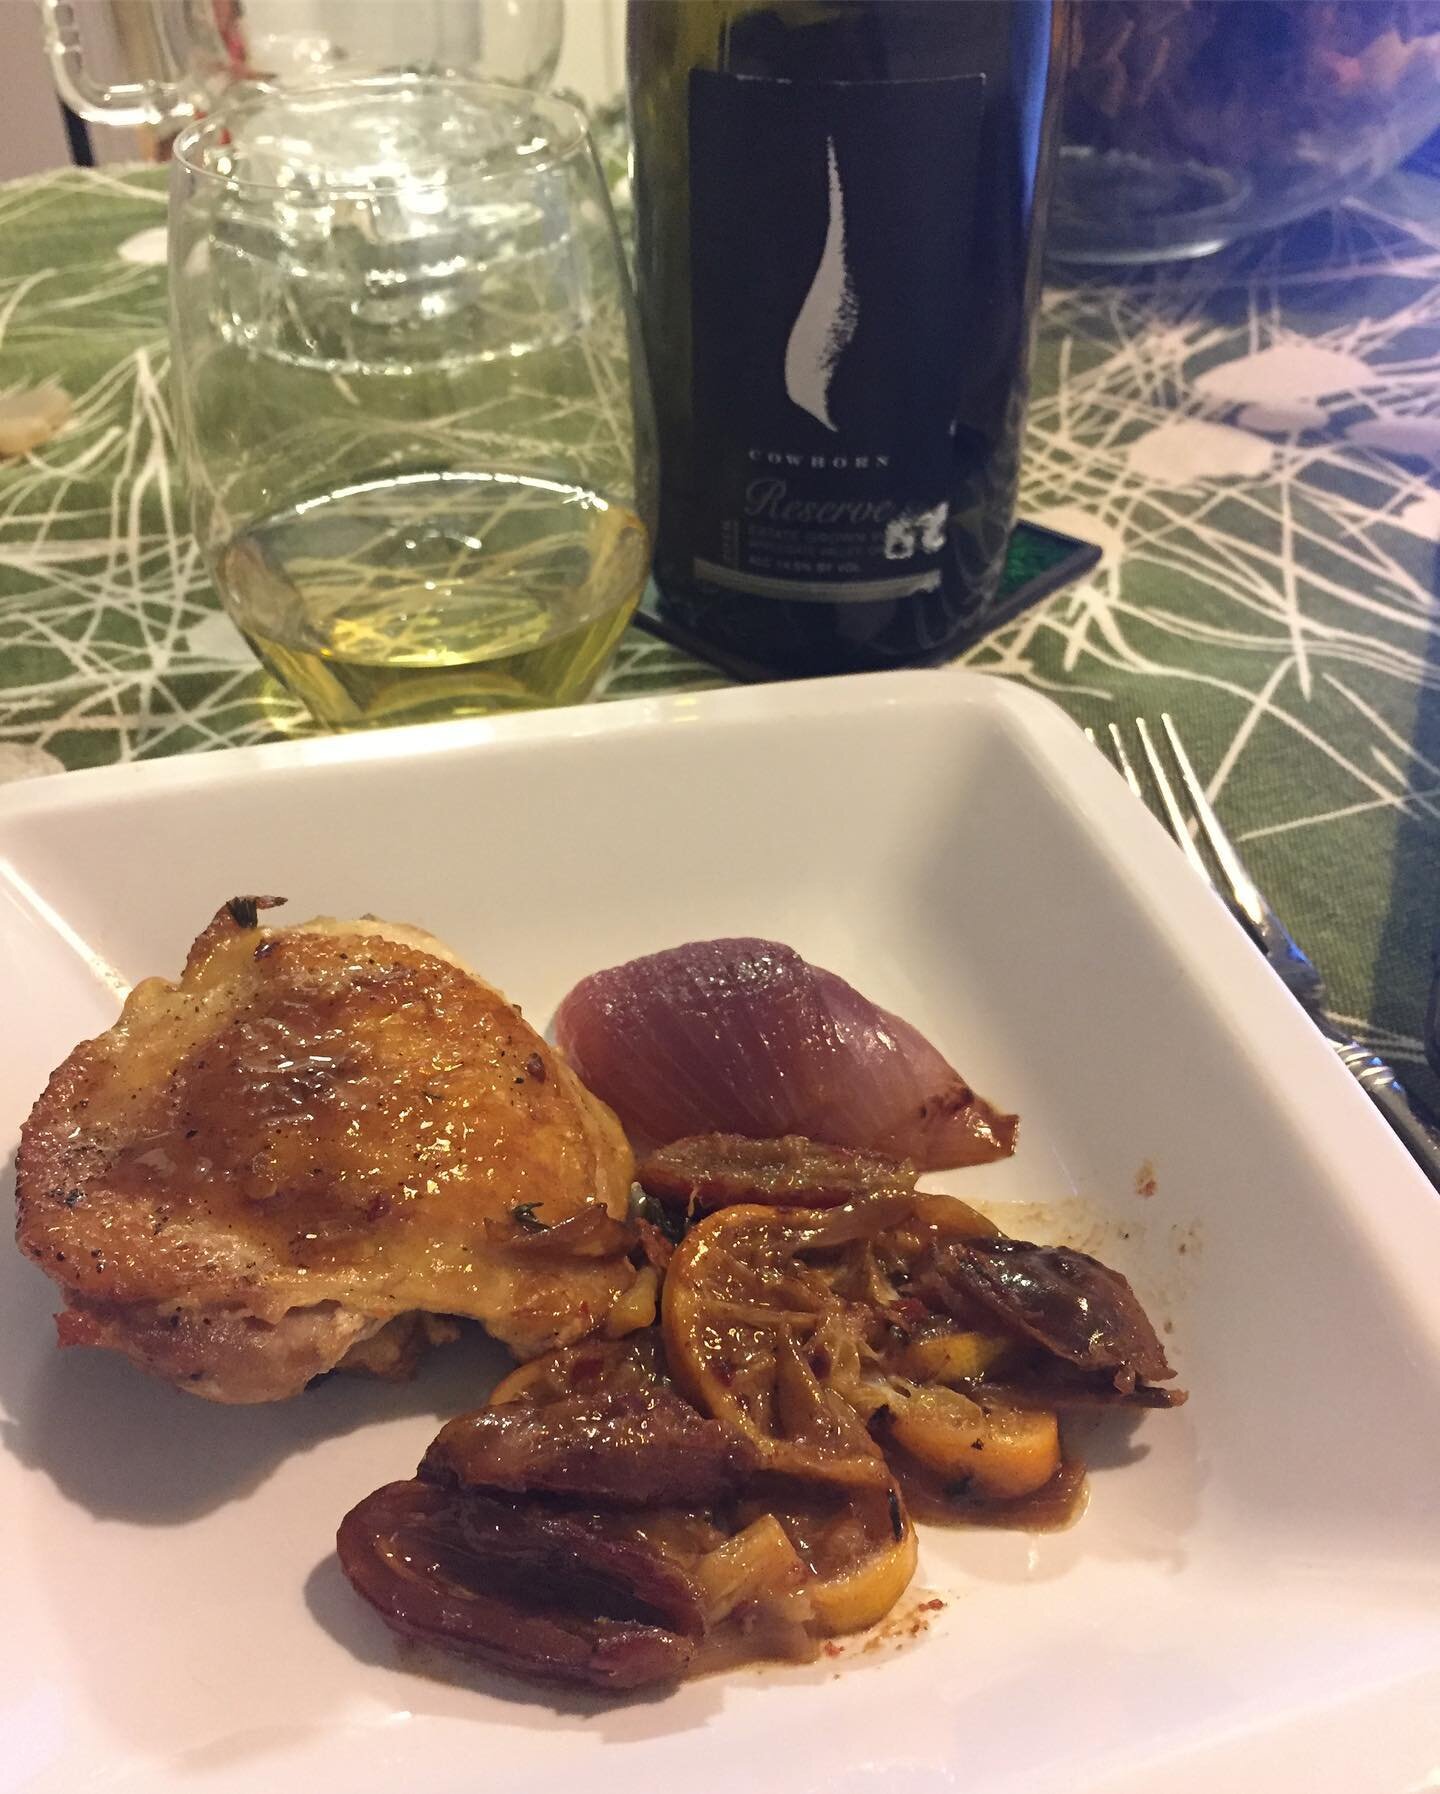 Made @alisoneroman one pot chicken with dates, lemon &amp; shallots (only w/ just thighs, because I&rsquo;m one person) Paired wonderfully with @cowhornwines Reserve Viognier 2016. There. That&rsquo;s my fancy holiday meal.